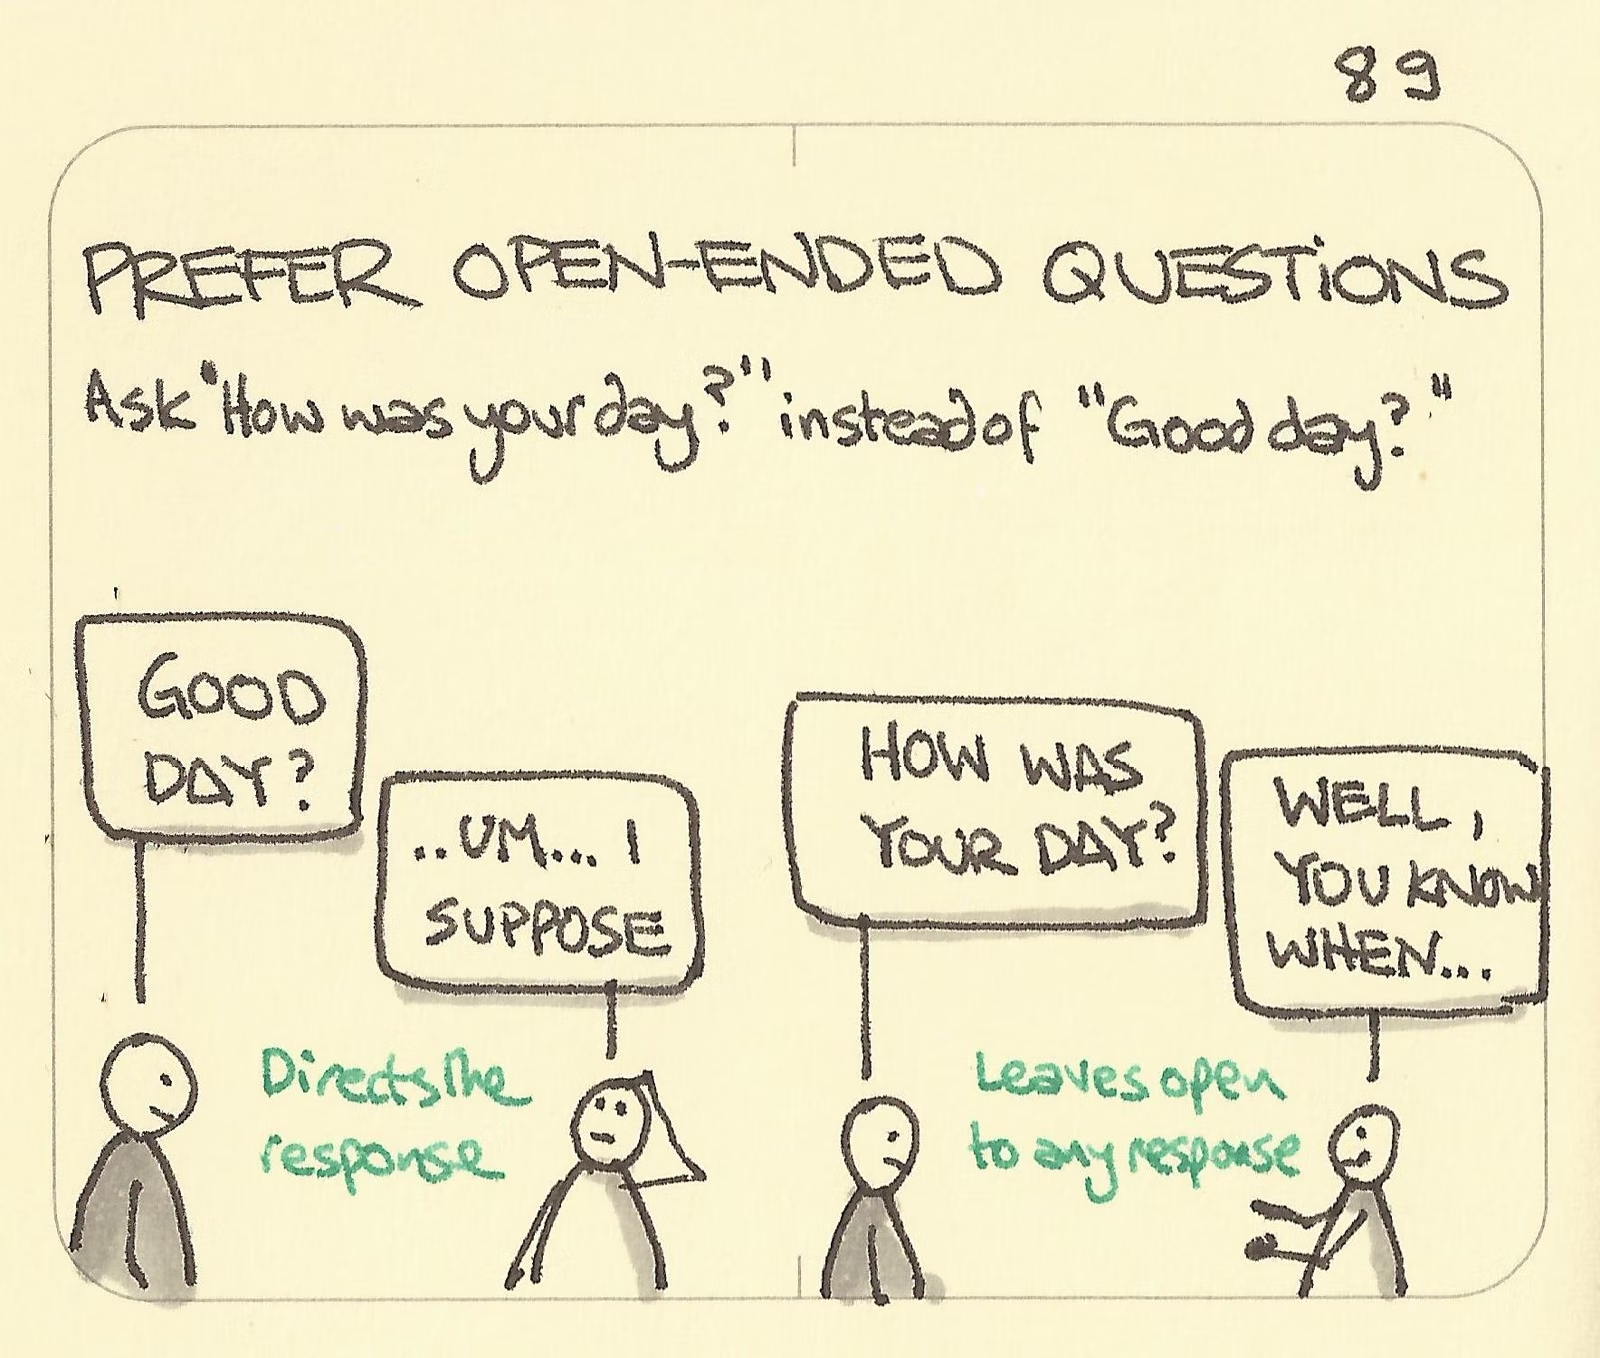 Sketchplanations cartoon that encourages researchers to ask open-ended questions that elicit longer responses, such as “How was your day?” rather than “Good day?”